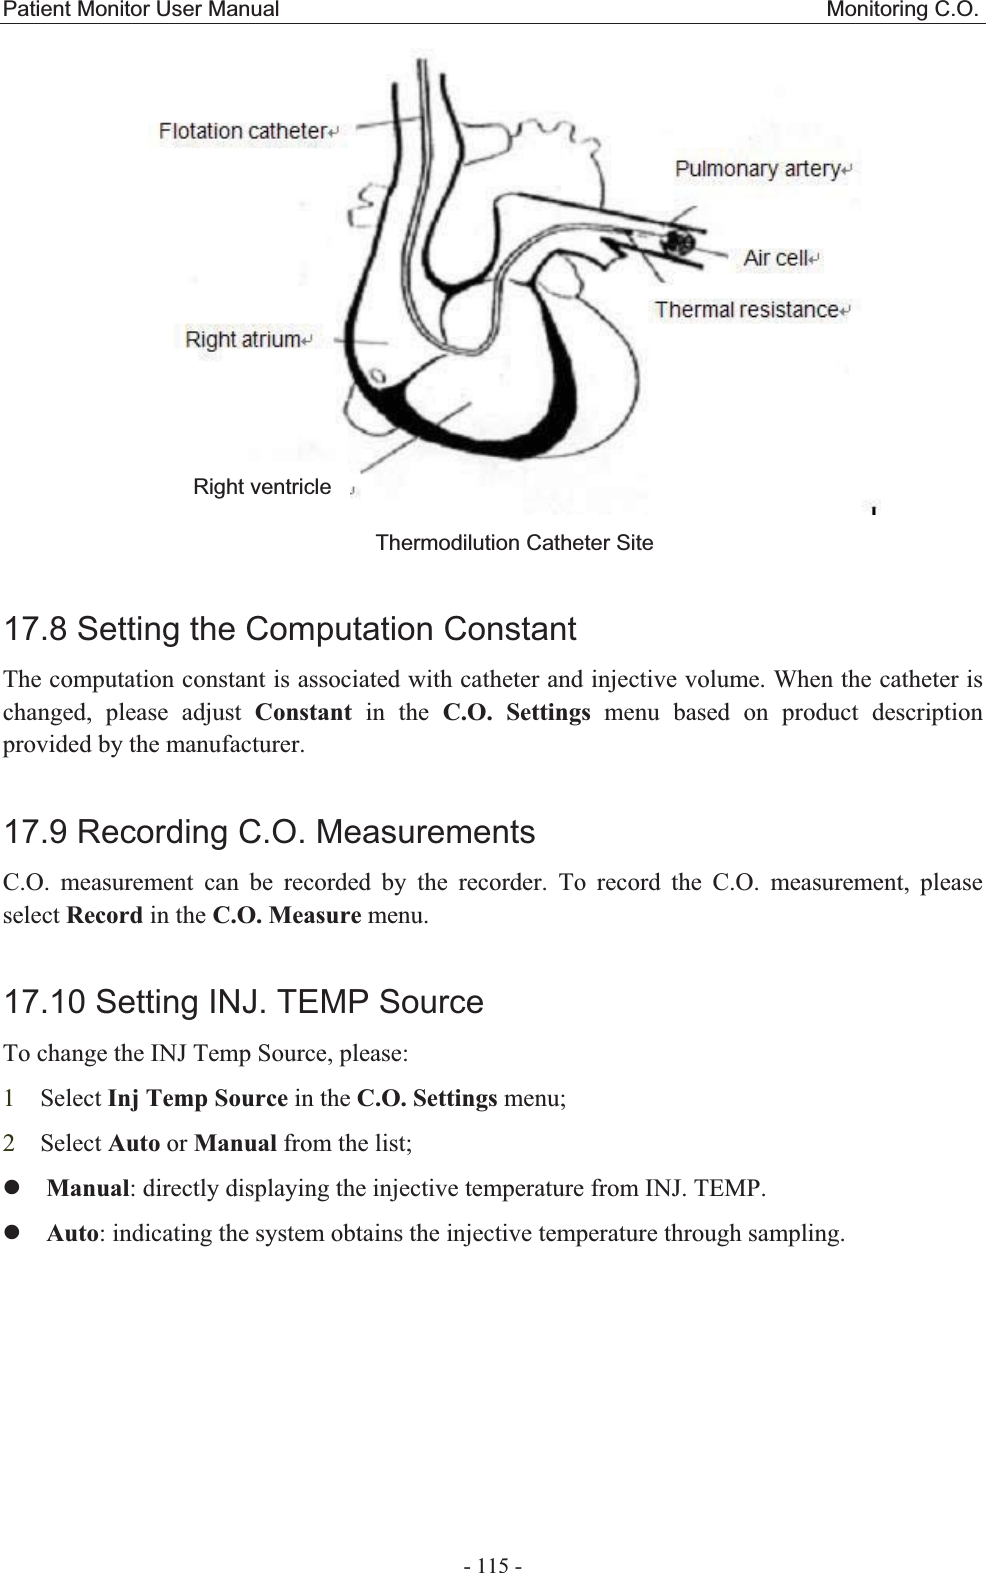 Patient Monitor User Manual                                                  Monitoring C.O.  - 115 -  Thermodilution Catheter Site 17.8 Setting the Computation ConstantThe computation constant is associated with catheter and injective volume. When the catheter is changed, please adjust Constant in the C.O. Settings menu based on product description provided by the manufacturer. 17.9 Recording C.O. MeasurementsC.O. measurement can be recorded by the recorder. To record the C.O. measurement, please select Record in the C.O. Measure menu. 17.10 Setting INJ. TEMP SourceTo change the INJ Temp Source, please: 1Select Inj Temp Source in the C.O. Settings menu; 2Select Auto or Manual from the list; zManual: directly displaying the injective temperature from INJ. TEMP. zAuto: indicating the system obtains the injective temperature through sampling.Right ventricle 